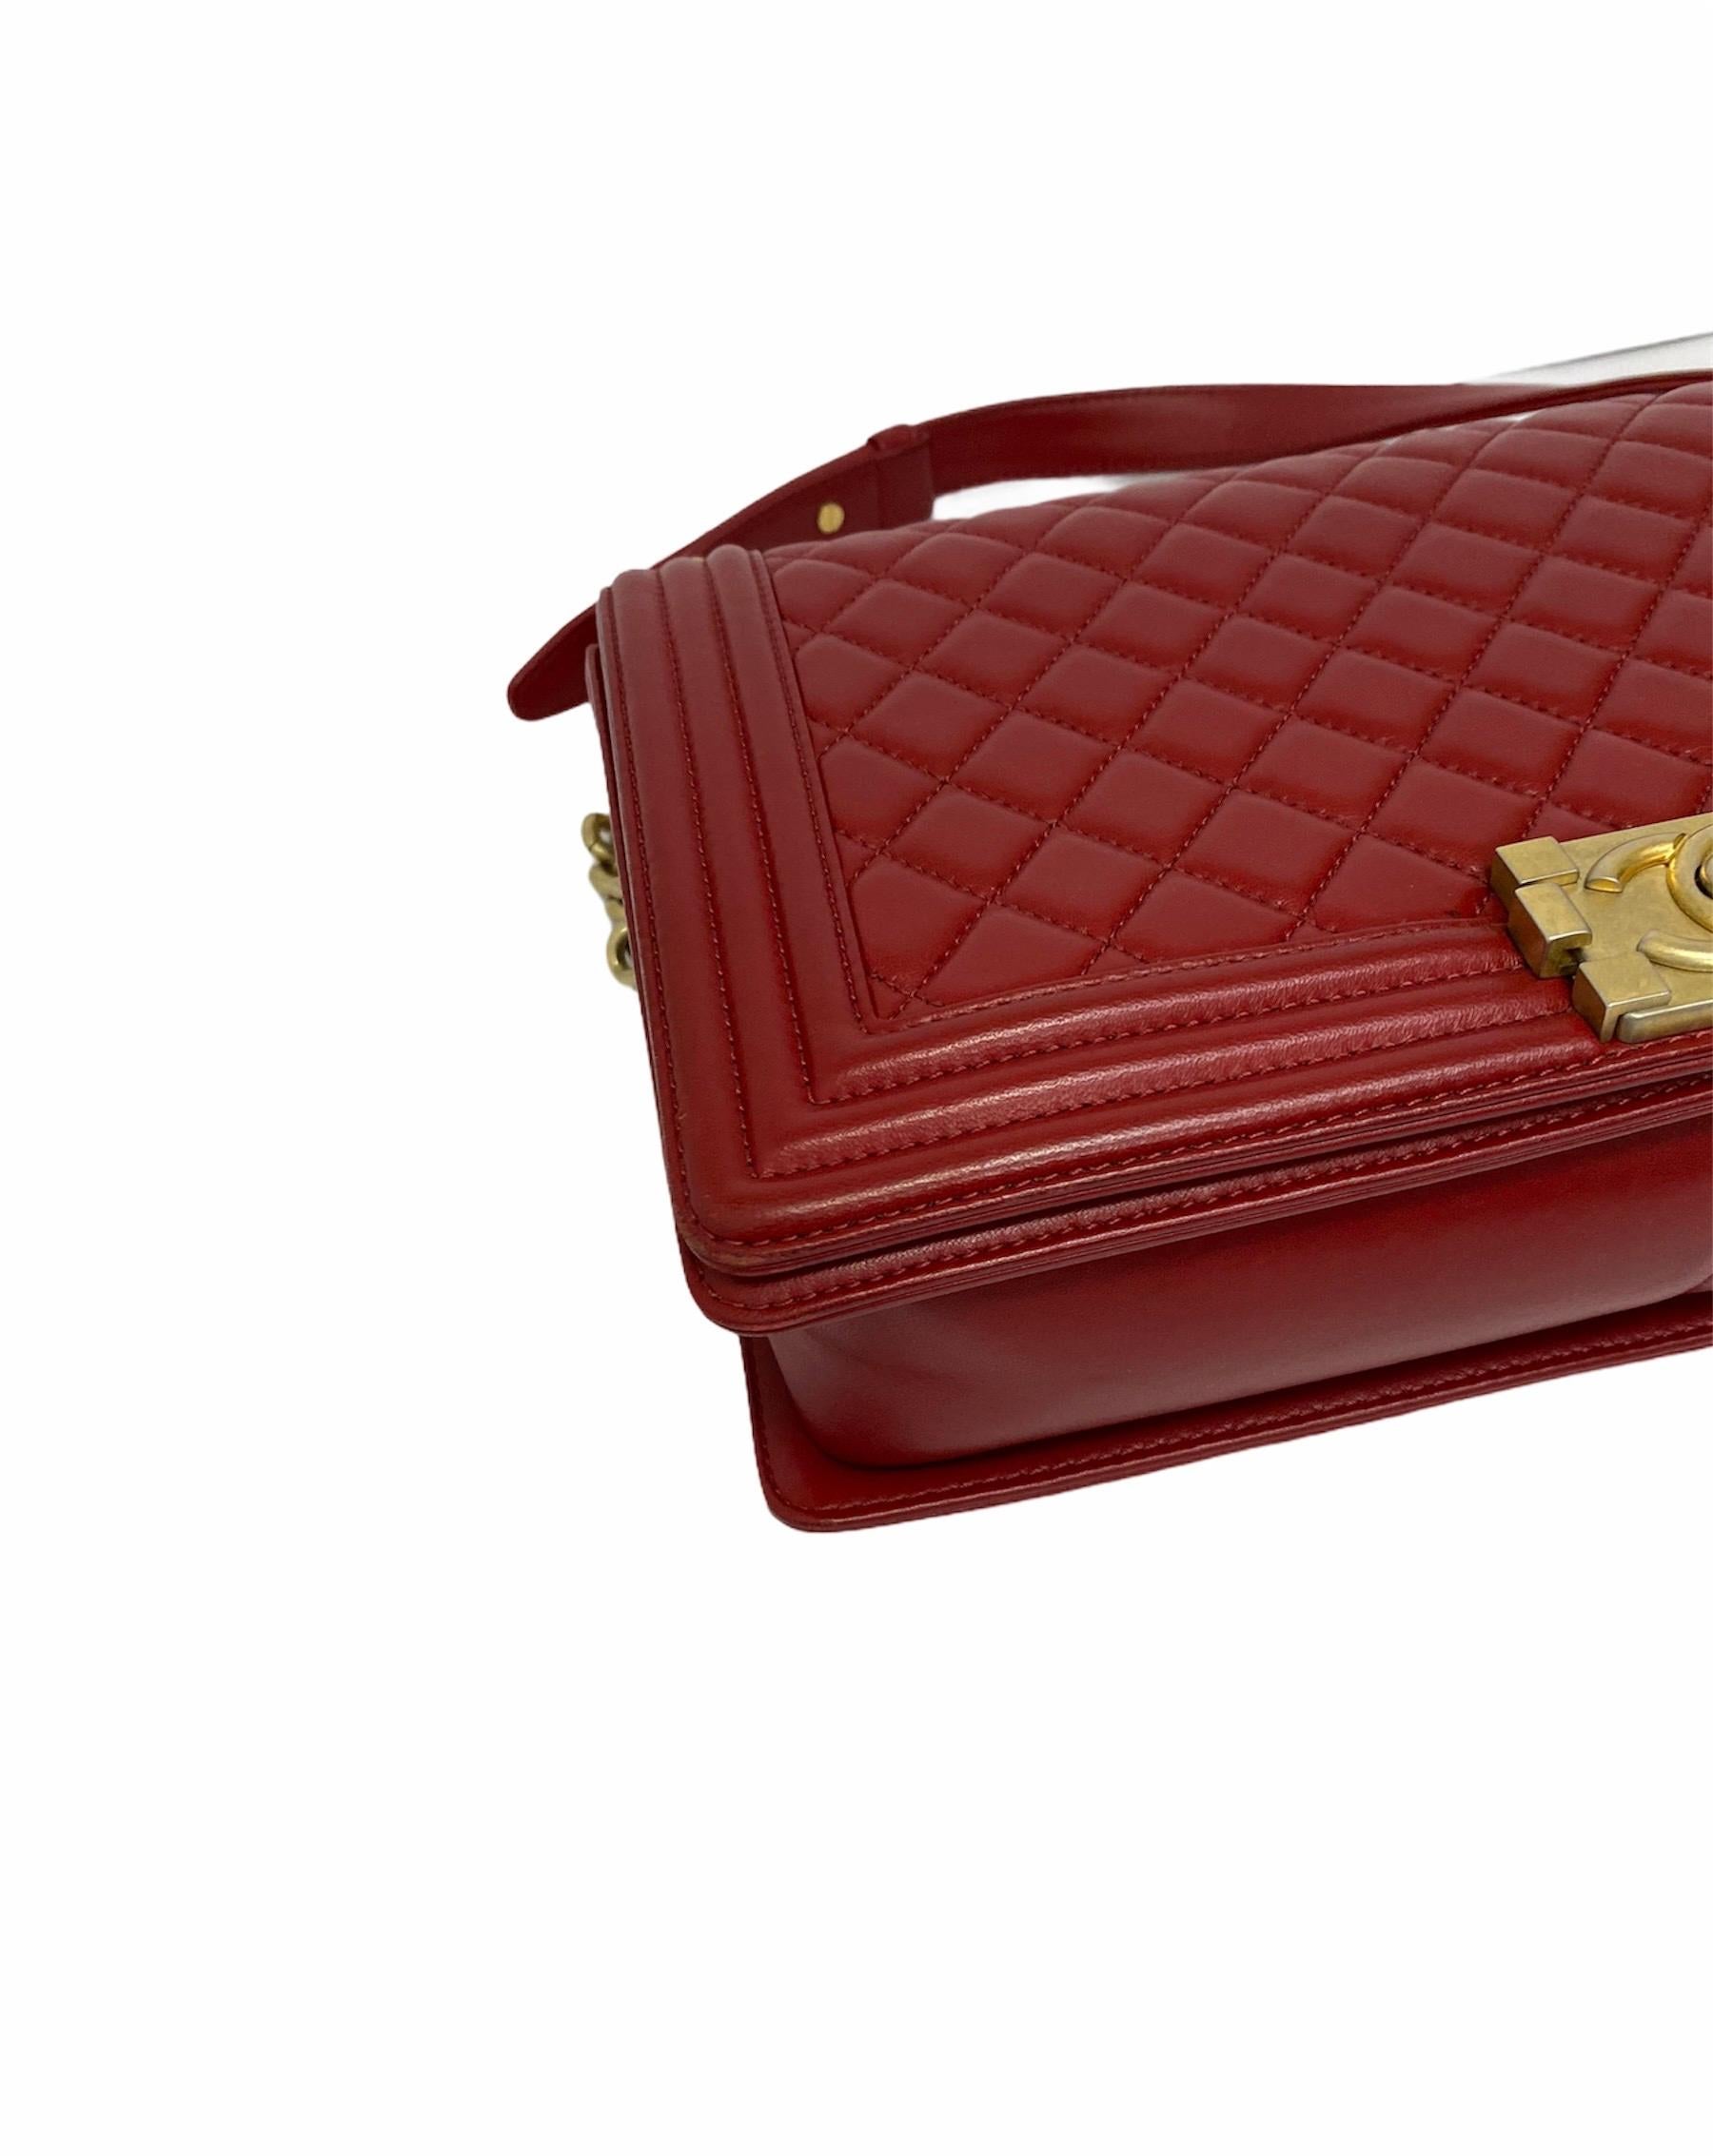 Chanel Red Leather Boy Bag 2